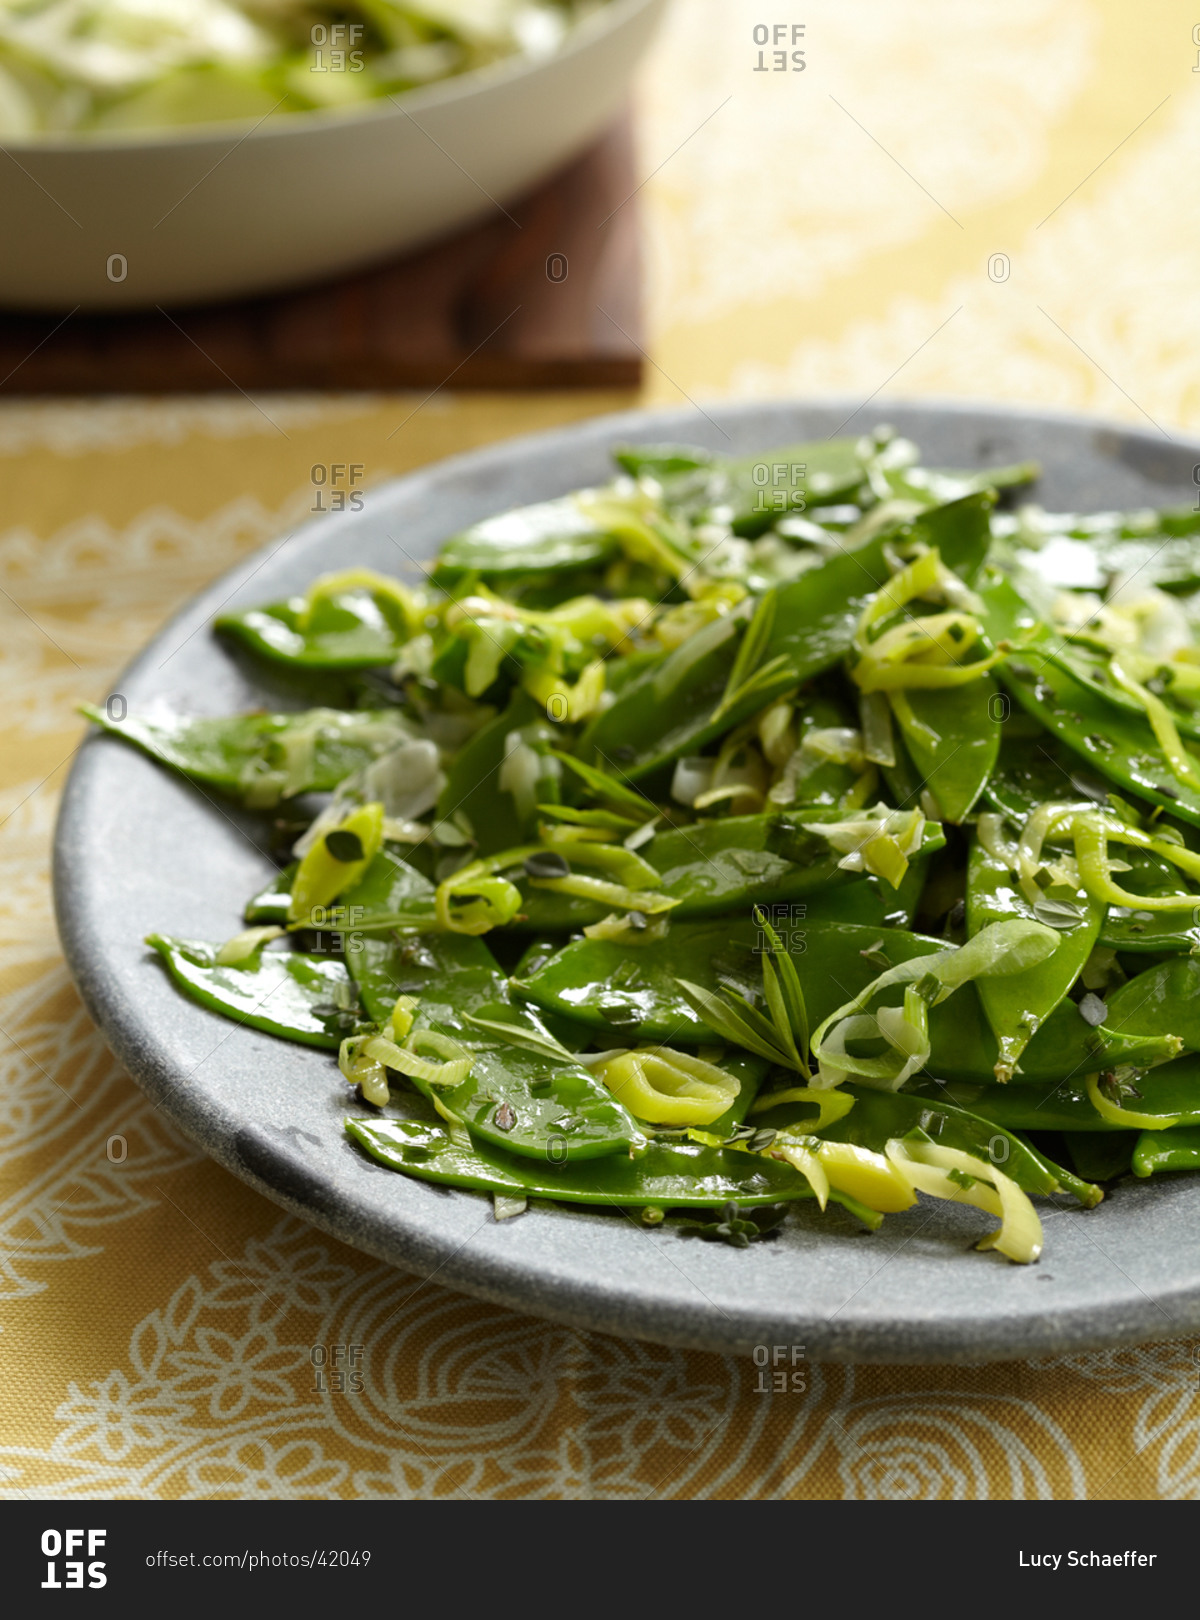 Snow peas with leek and herbs